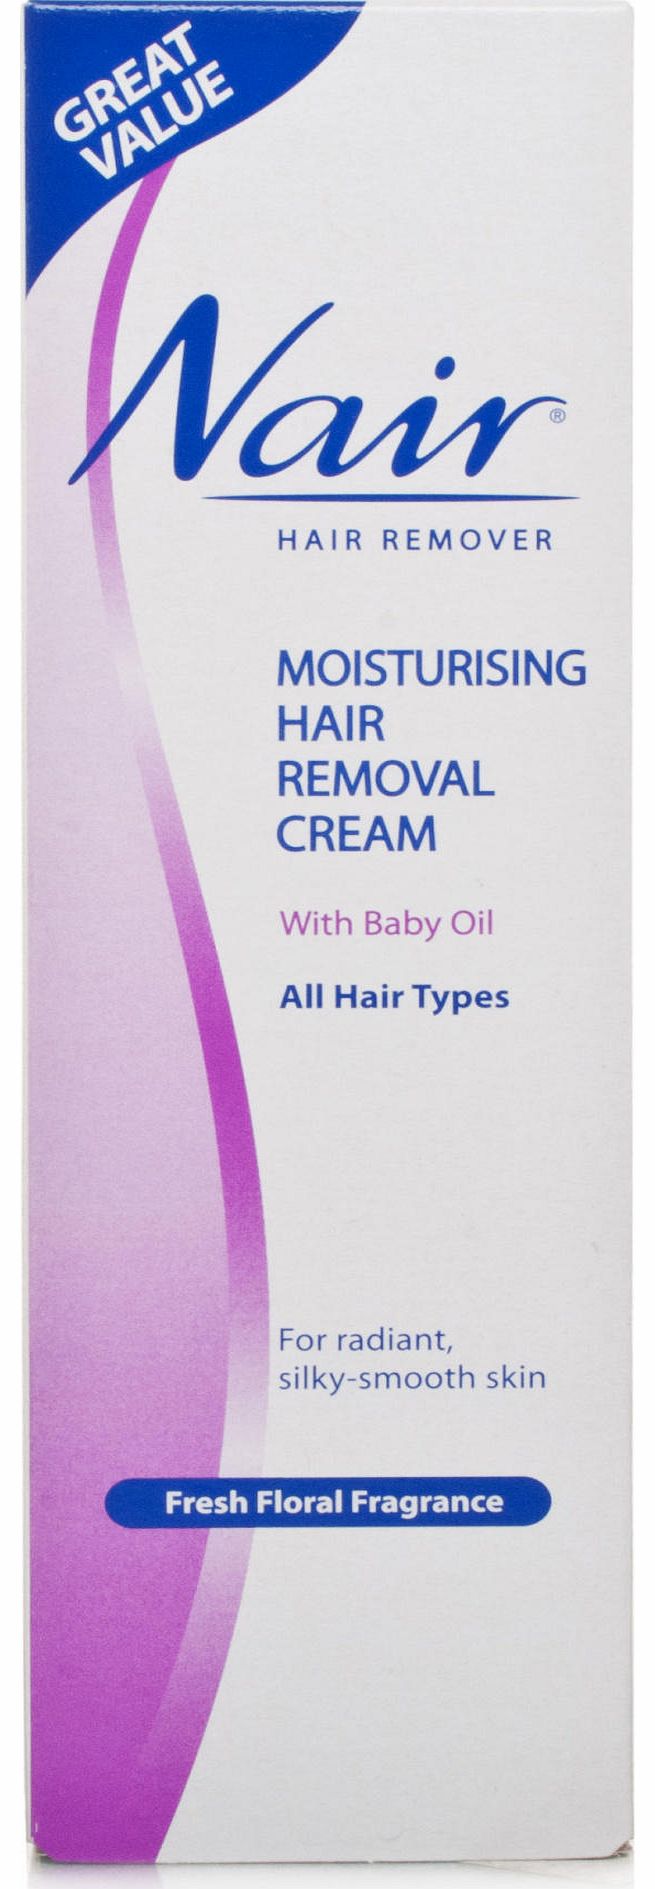 Nair Moisturising Hair Removal Cream with Baby Oil